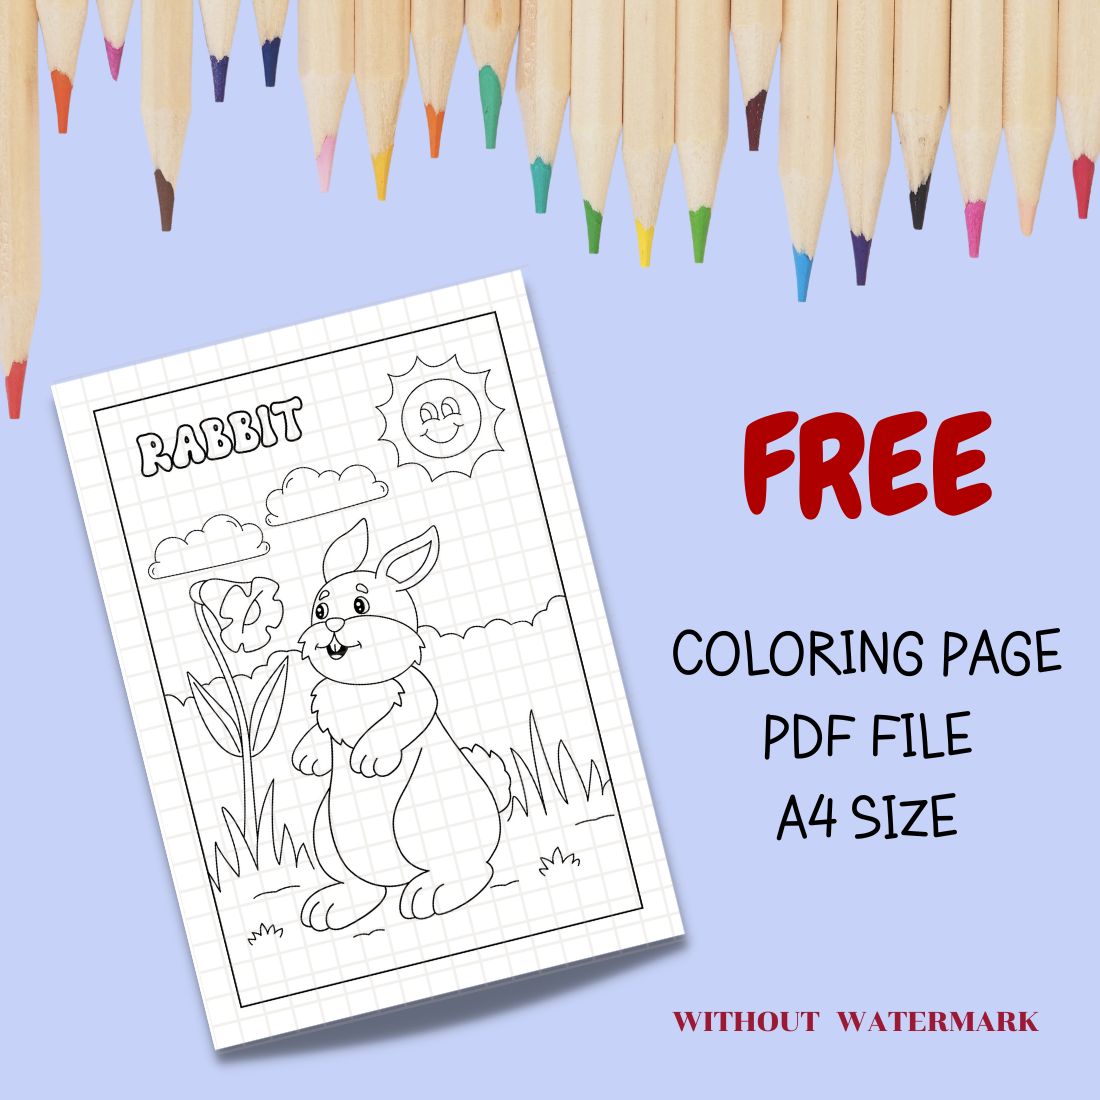 FREE RABBIT COLORING PAGE cover image.